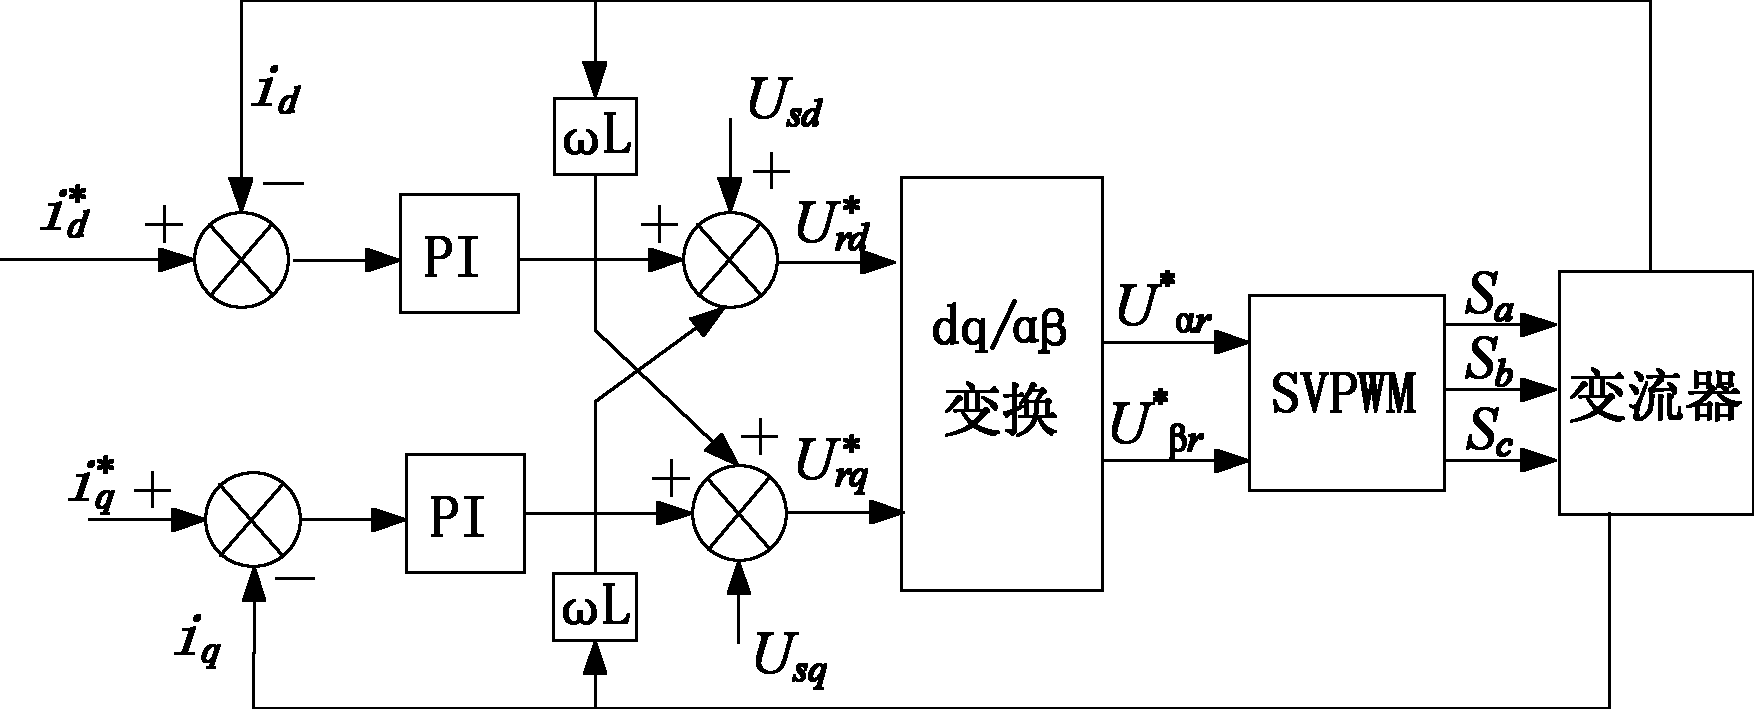 Converter modular design and control method matched with battery grouping application